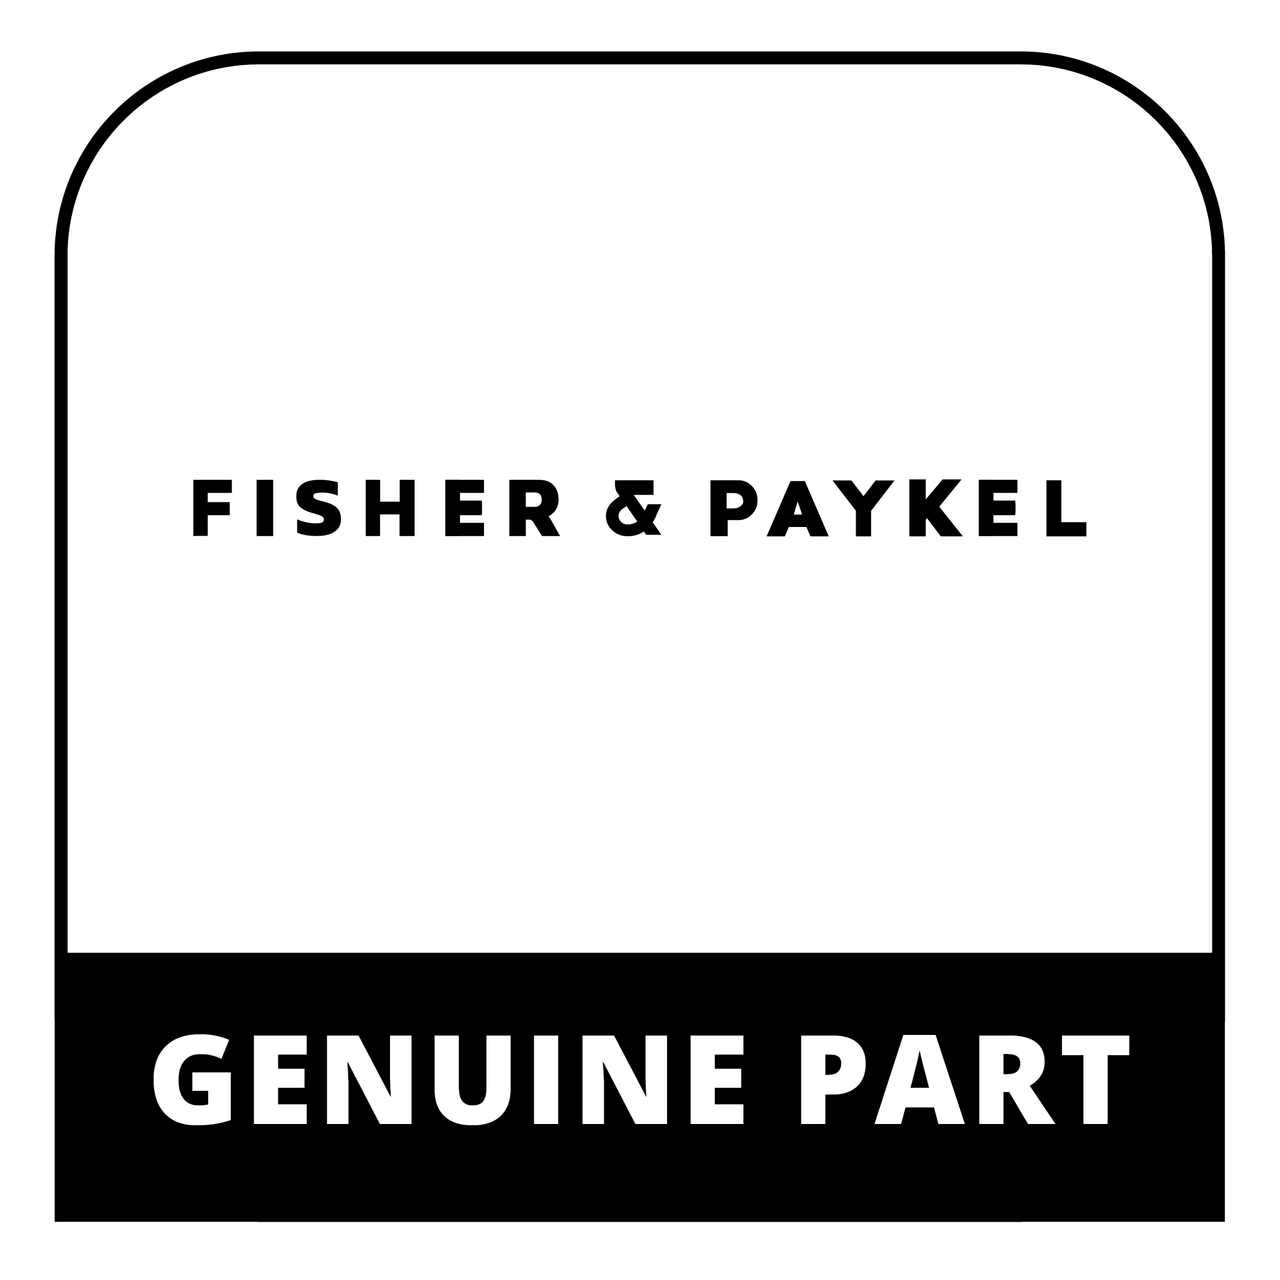 Fisher & Paykel 522088 - Motor Kit Assembly - Genuine Fisher & Paykel (DCS) Part